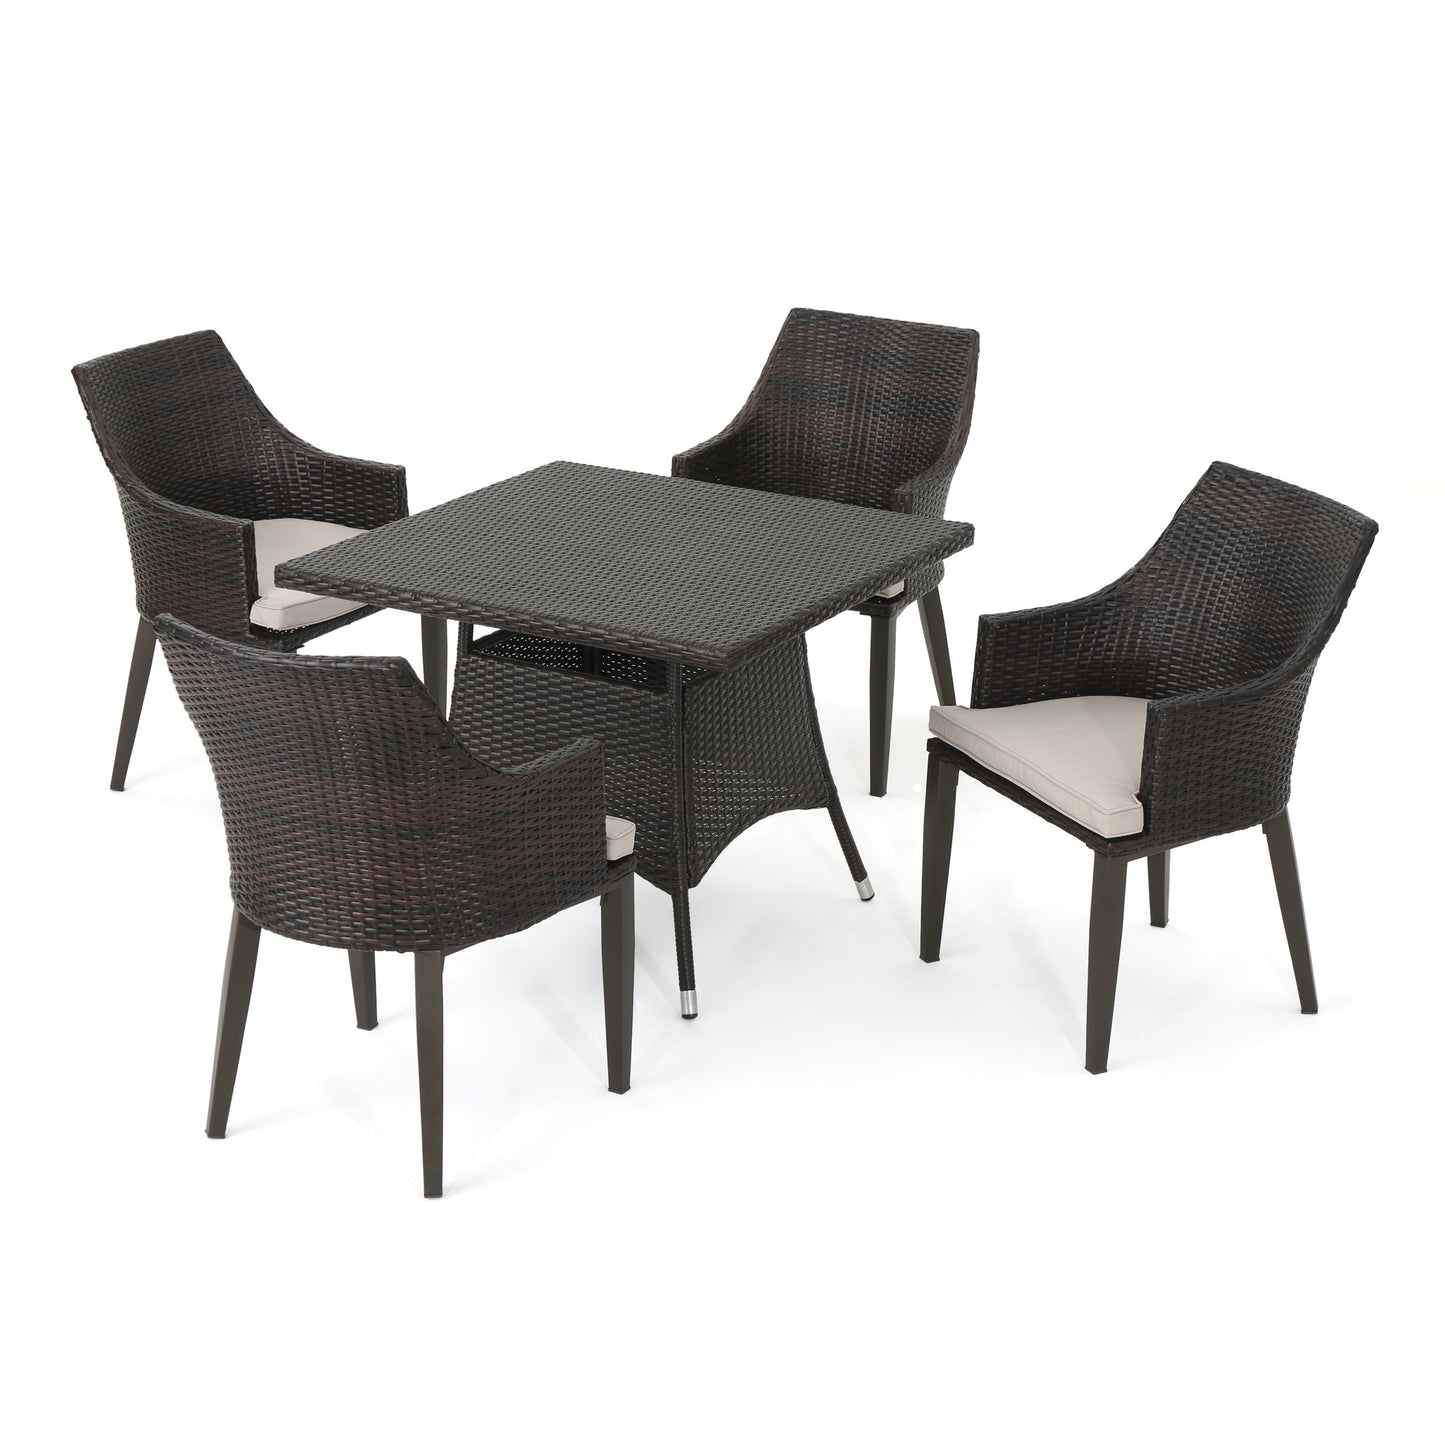 Leeward Outdoor 5 Piece Wicker Square Dining Set with Water Resistant Cushions